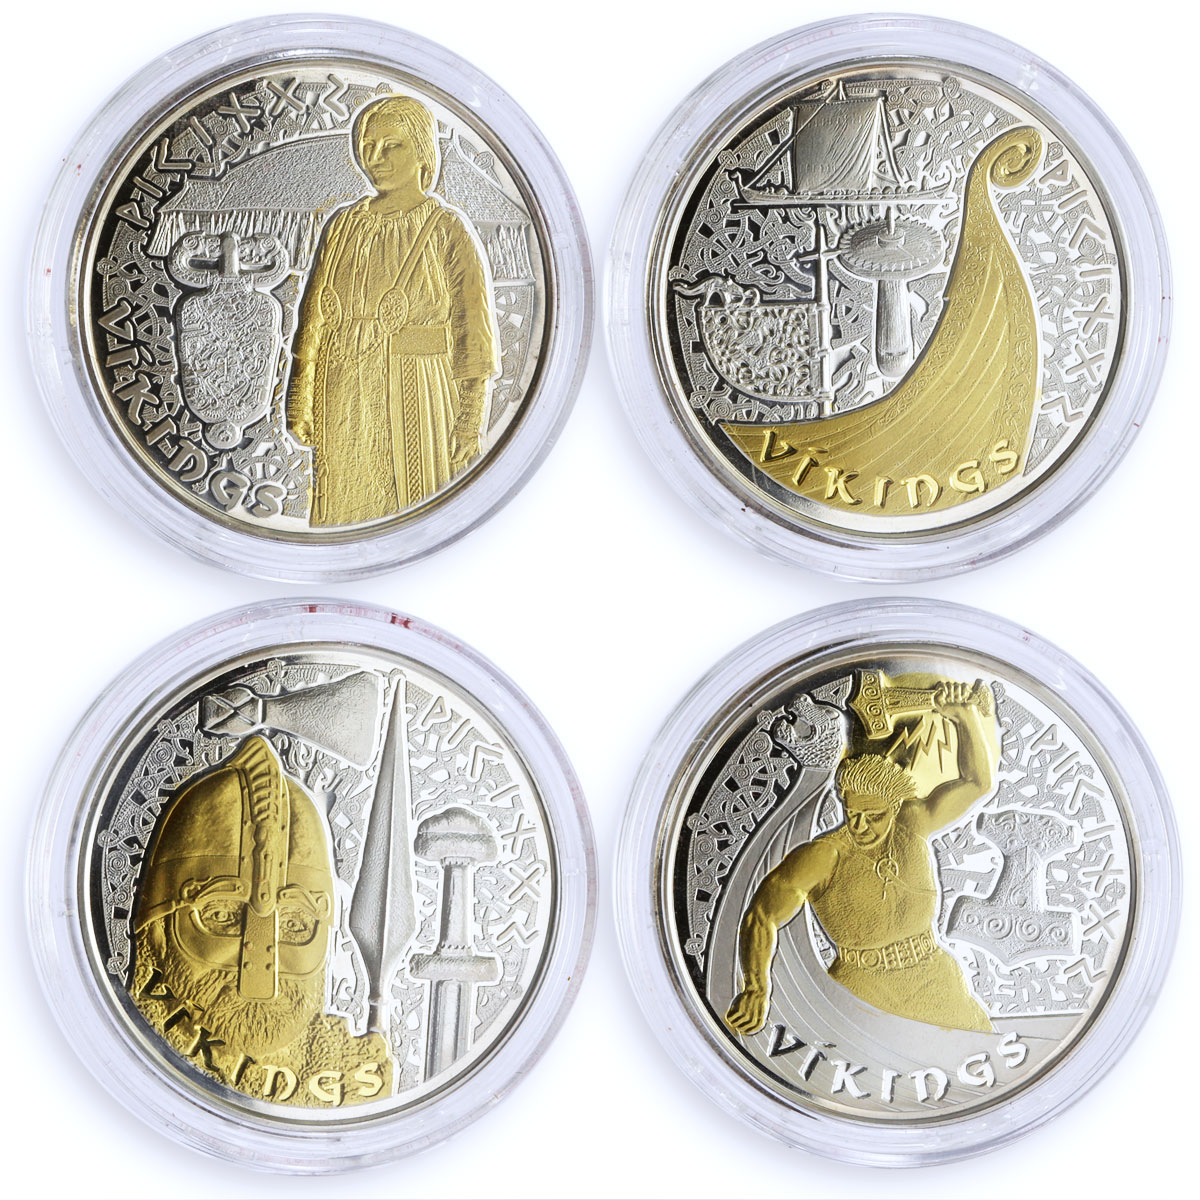 Andorra set 4 coins The Vikings gilded silver coins 2008